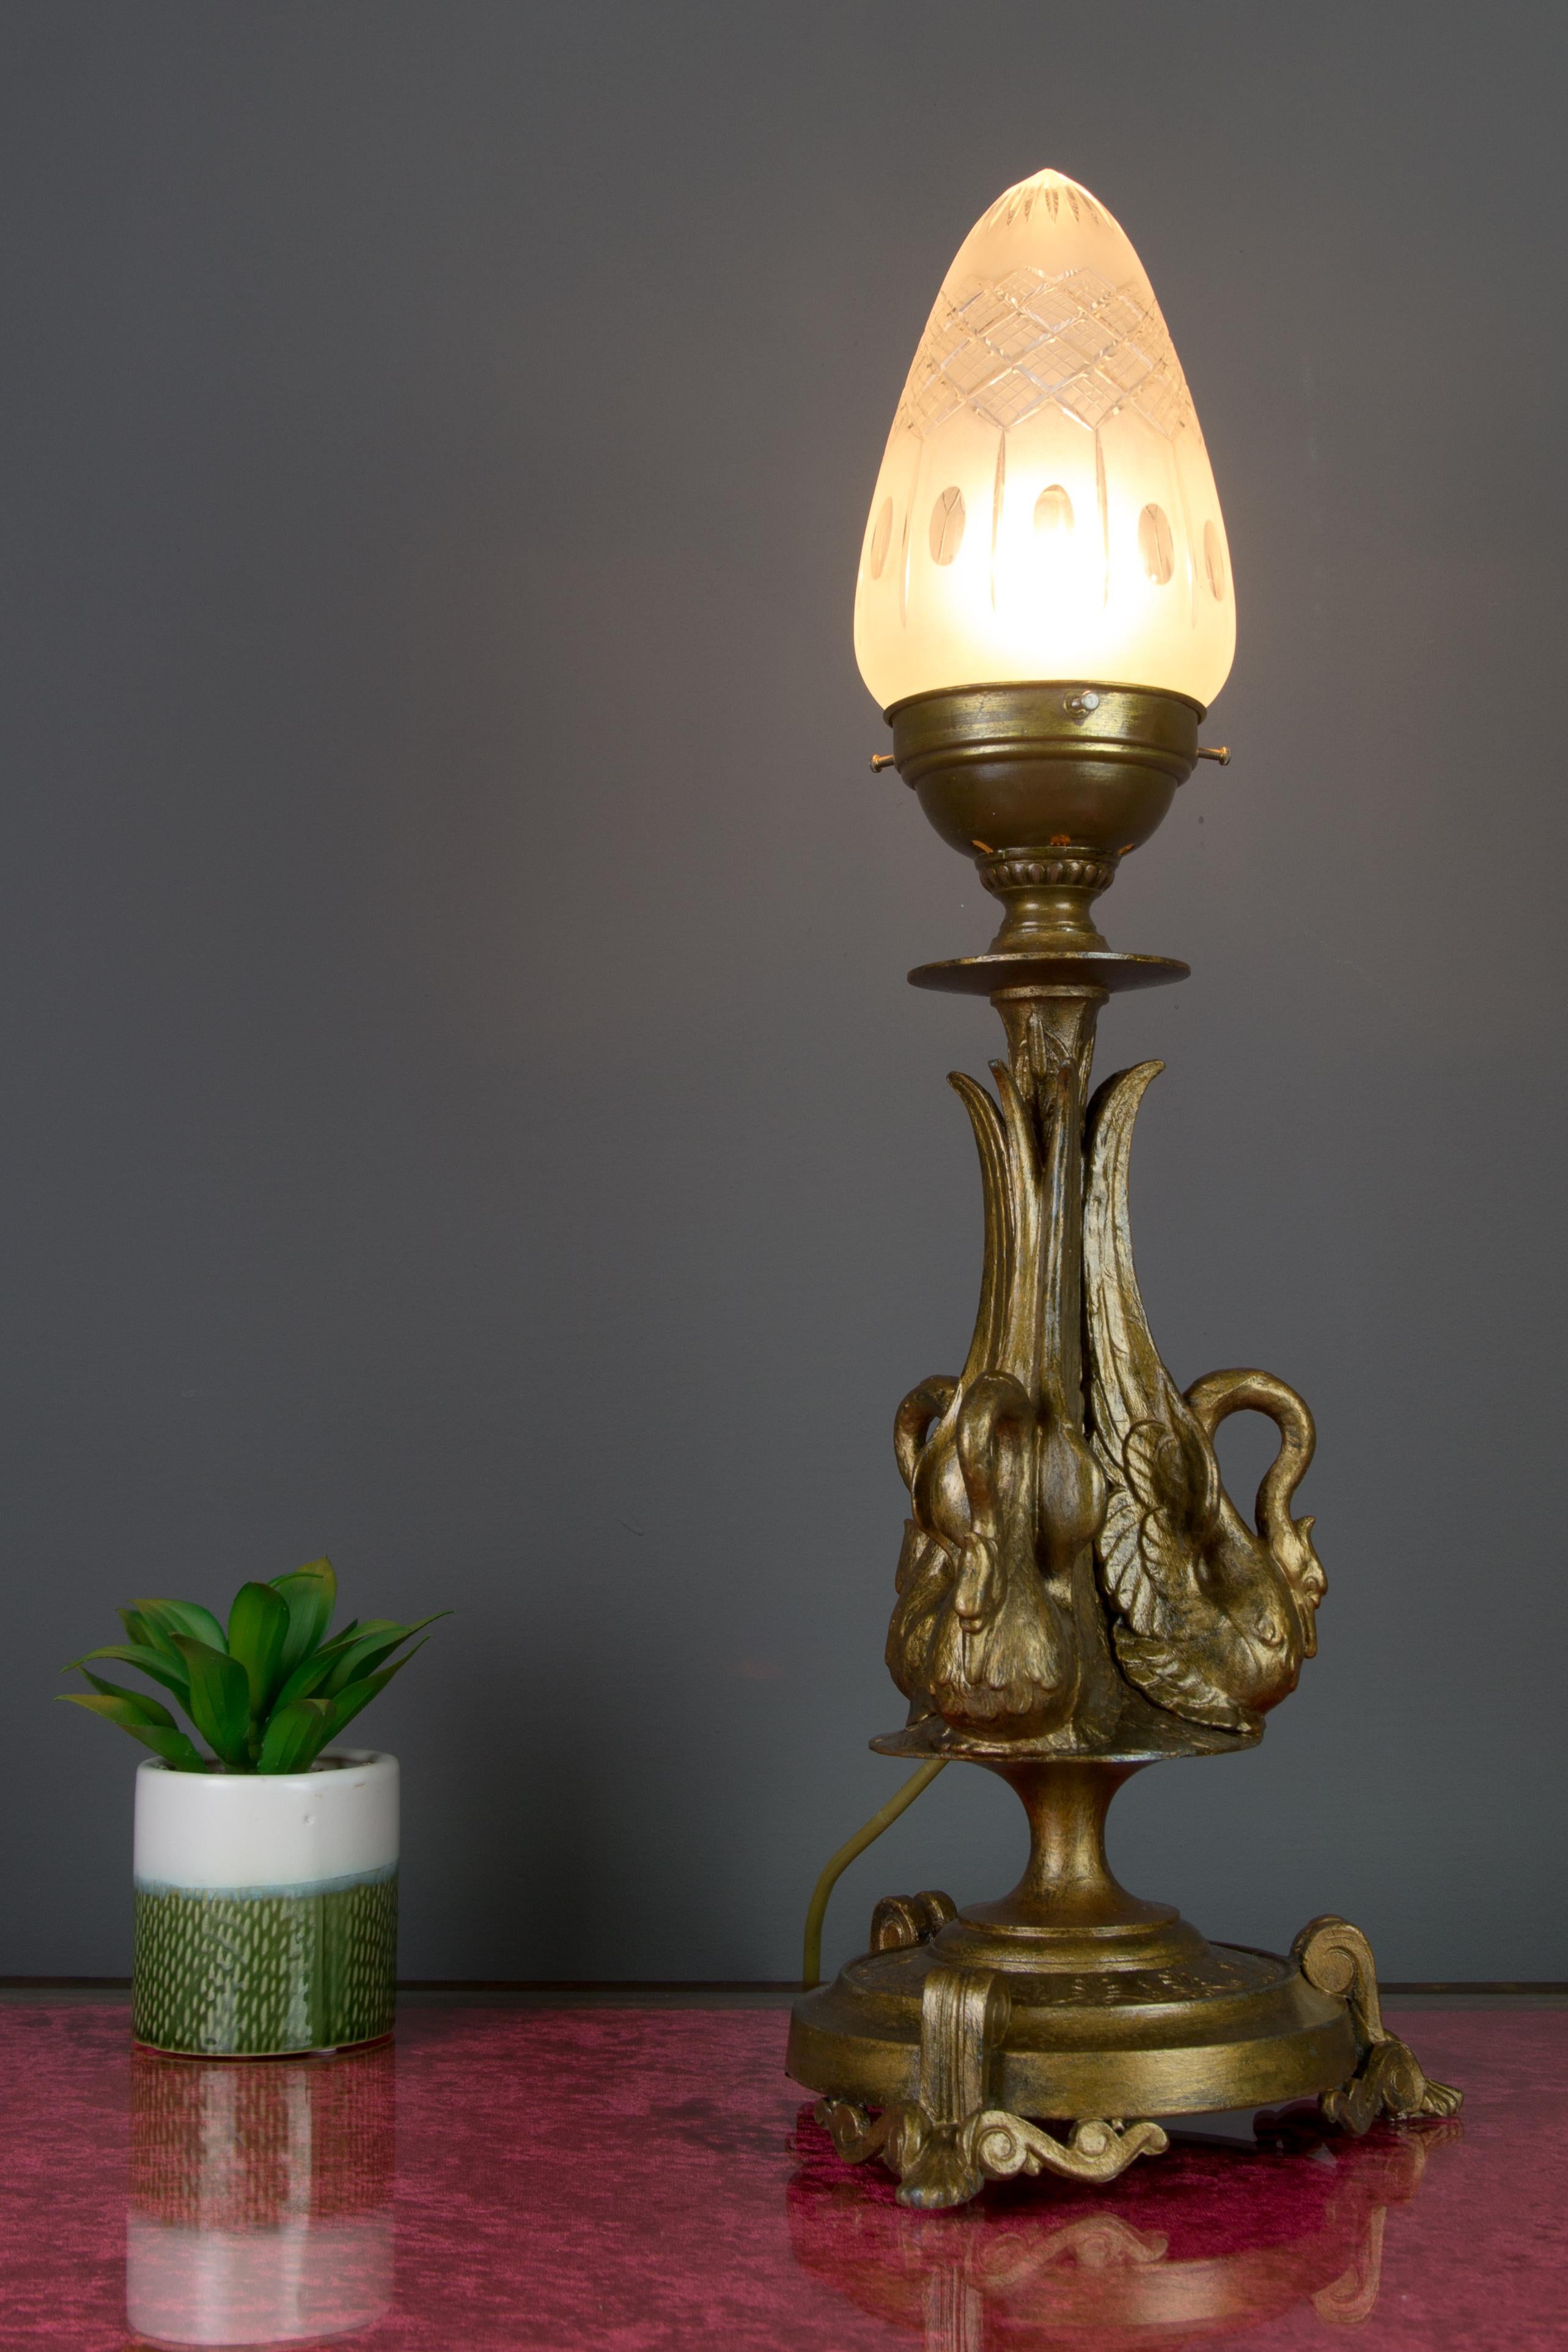 The beautifully shaped French Empire-style table lamp, which is an electrified petroleum lamp, features a bronze-colored pewter body adorned with three elegant swan figures. One socket for E27 (E26) size light bulb. To the US will be shipped with an